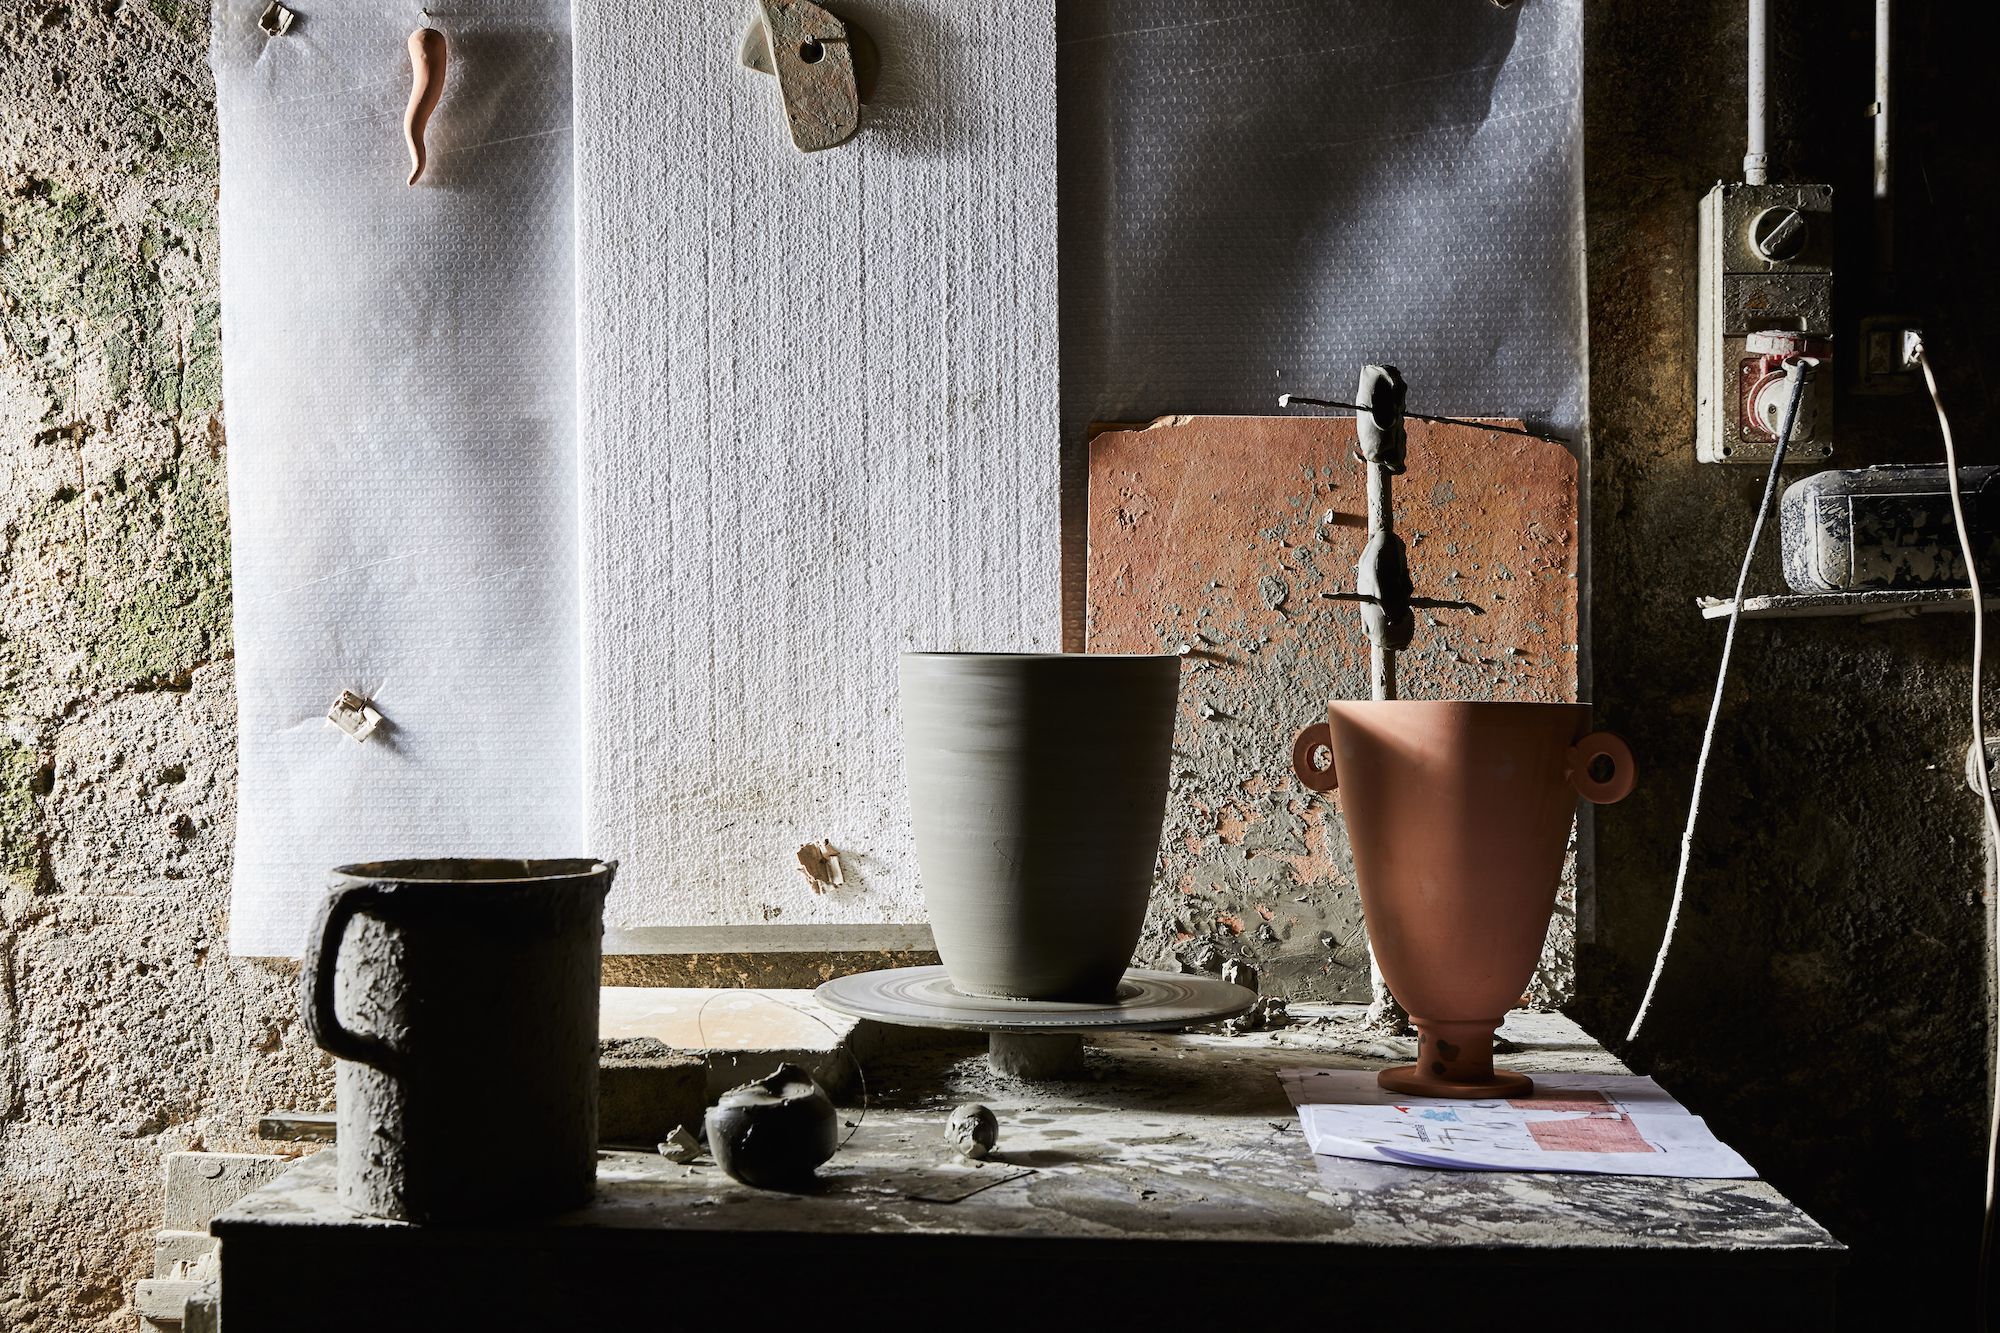 Wall, Room, Still life photography, Window, Textile, Architecture, Interior design, Photography, Furniture, House, 